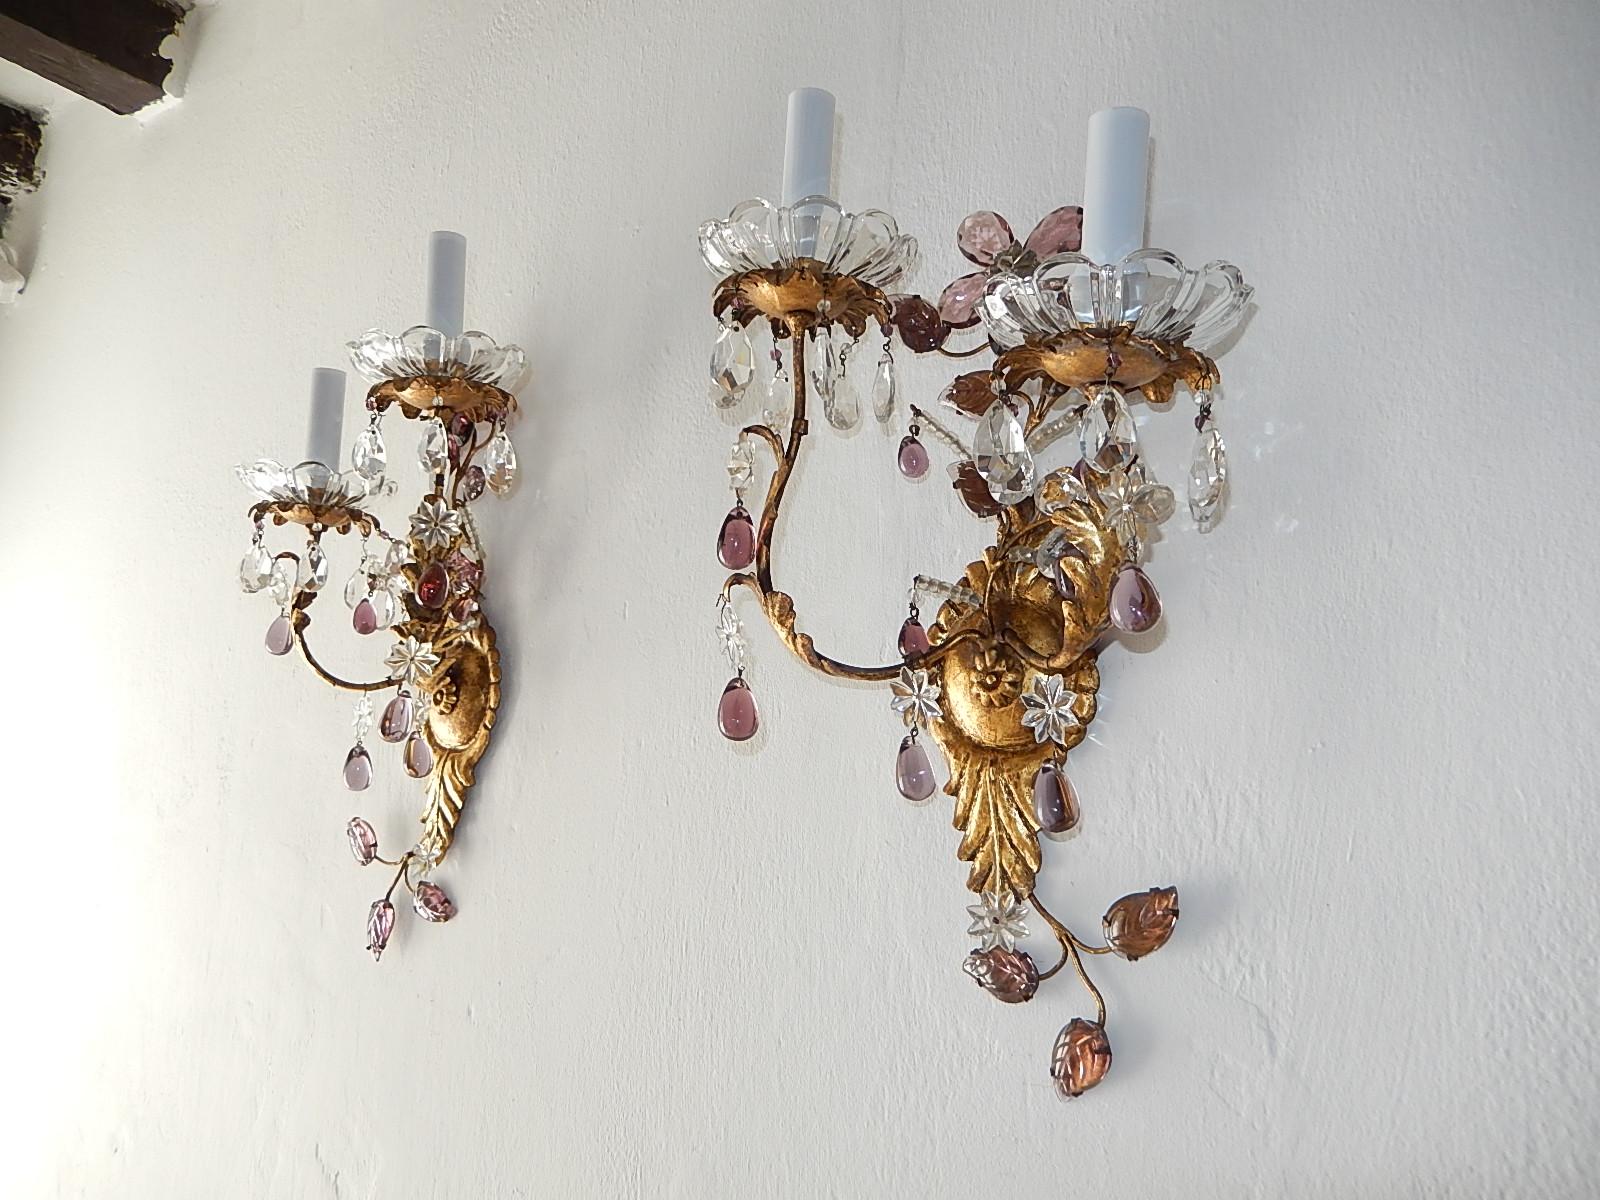 Housing two-light each. Rewired and ready to hang. Big amethyst prism flower on top. Gilt metal with clear and amethyst beads. Crystal prisms, flowers and stars. Amethyst leaves and drops. Beading on stem. Free priority UPS shipping from Italy.